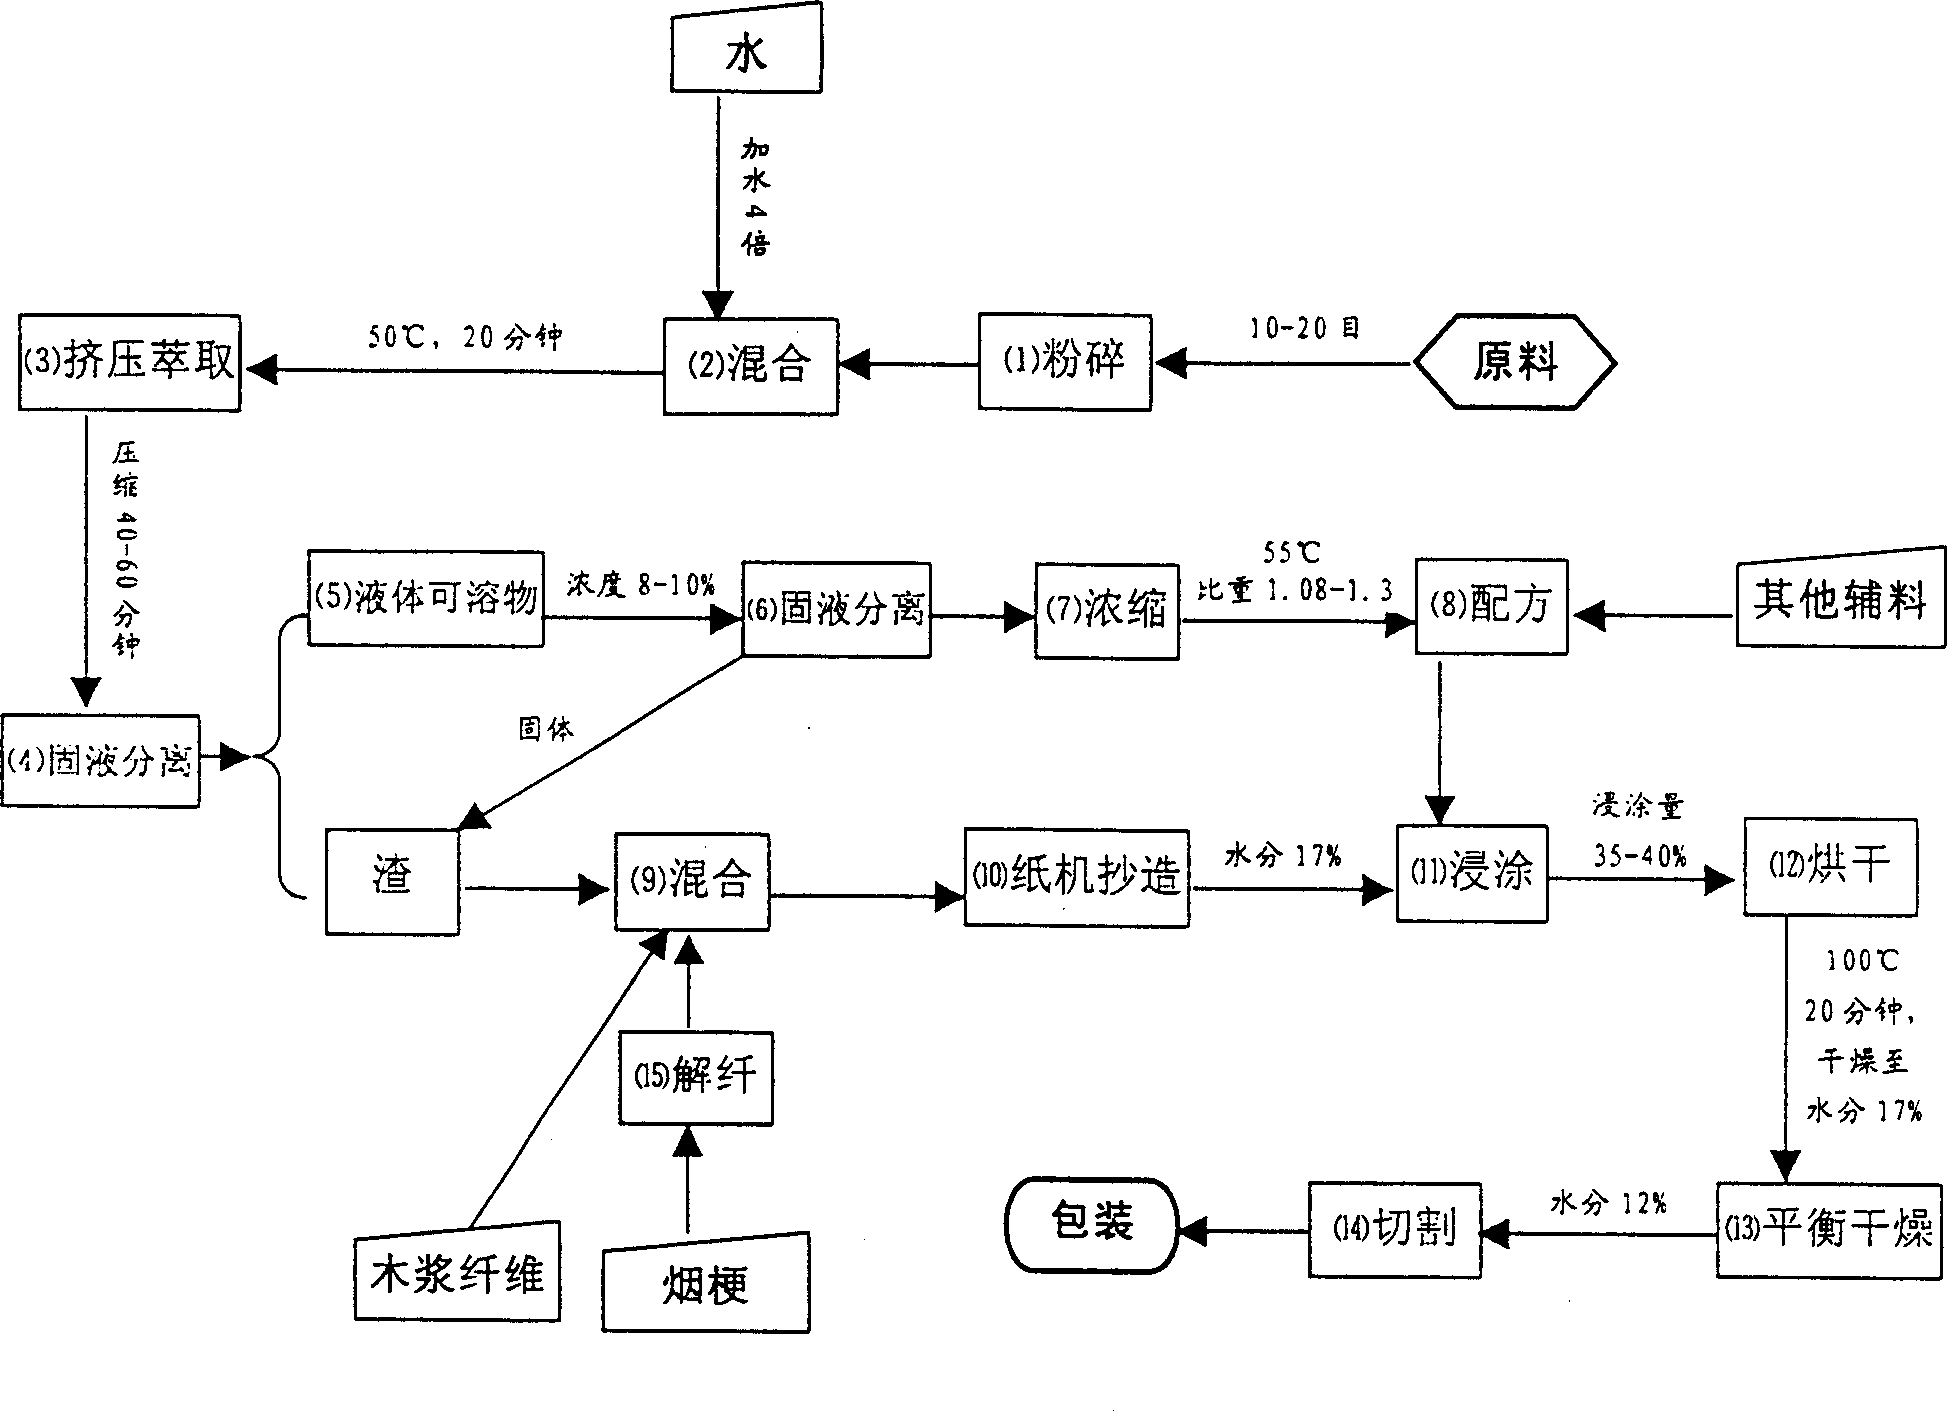 Method for processing ginkgo leaves products used for cigarette